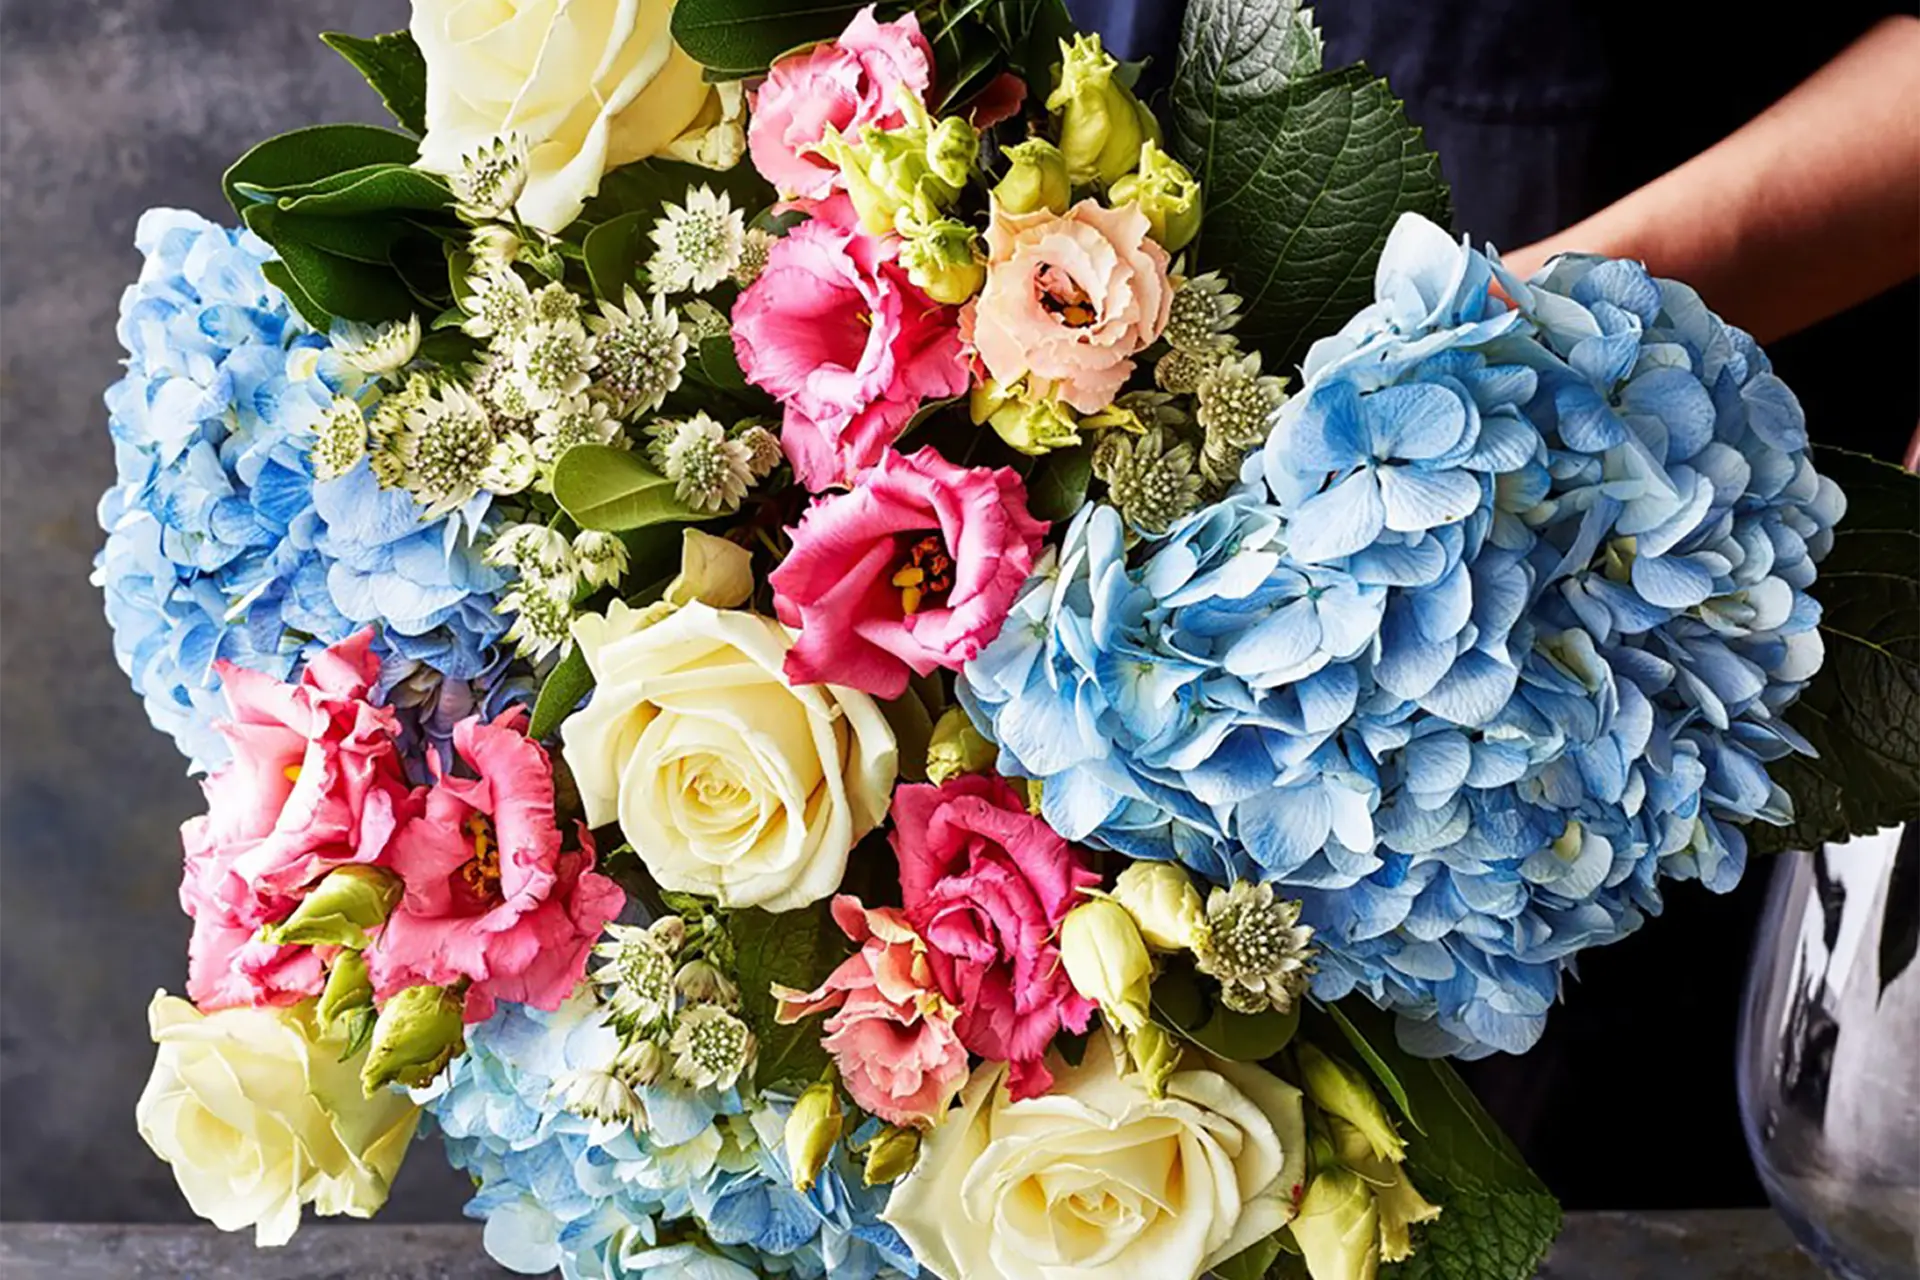 LIMITED EDITION MAMMA MIA! BOUQUETS WITH M&S